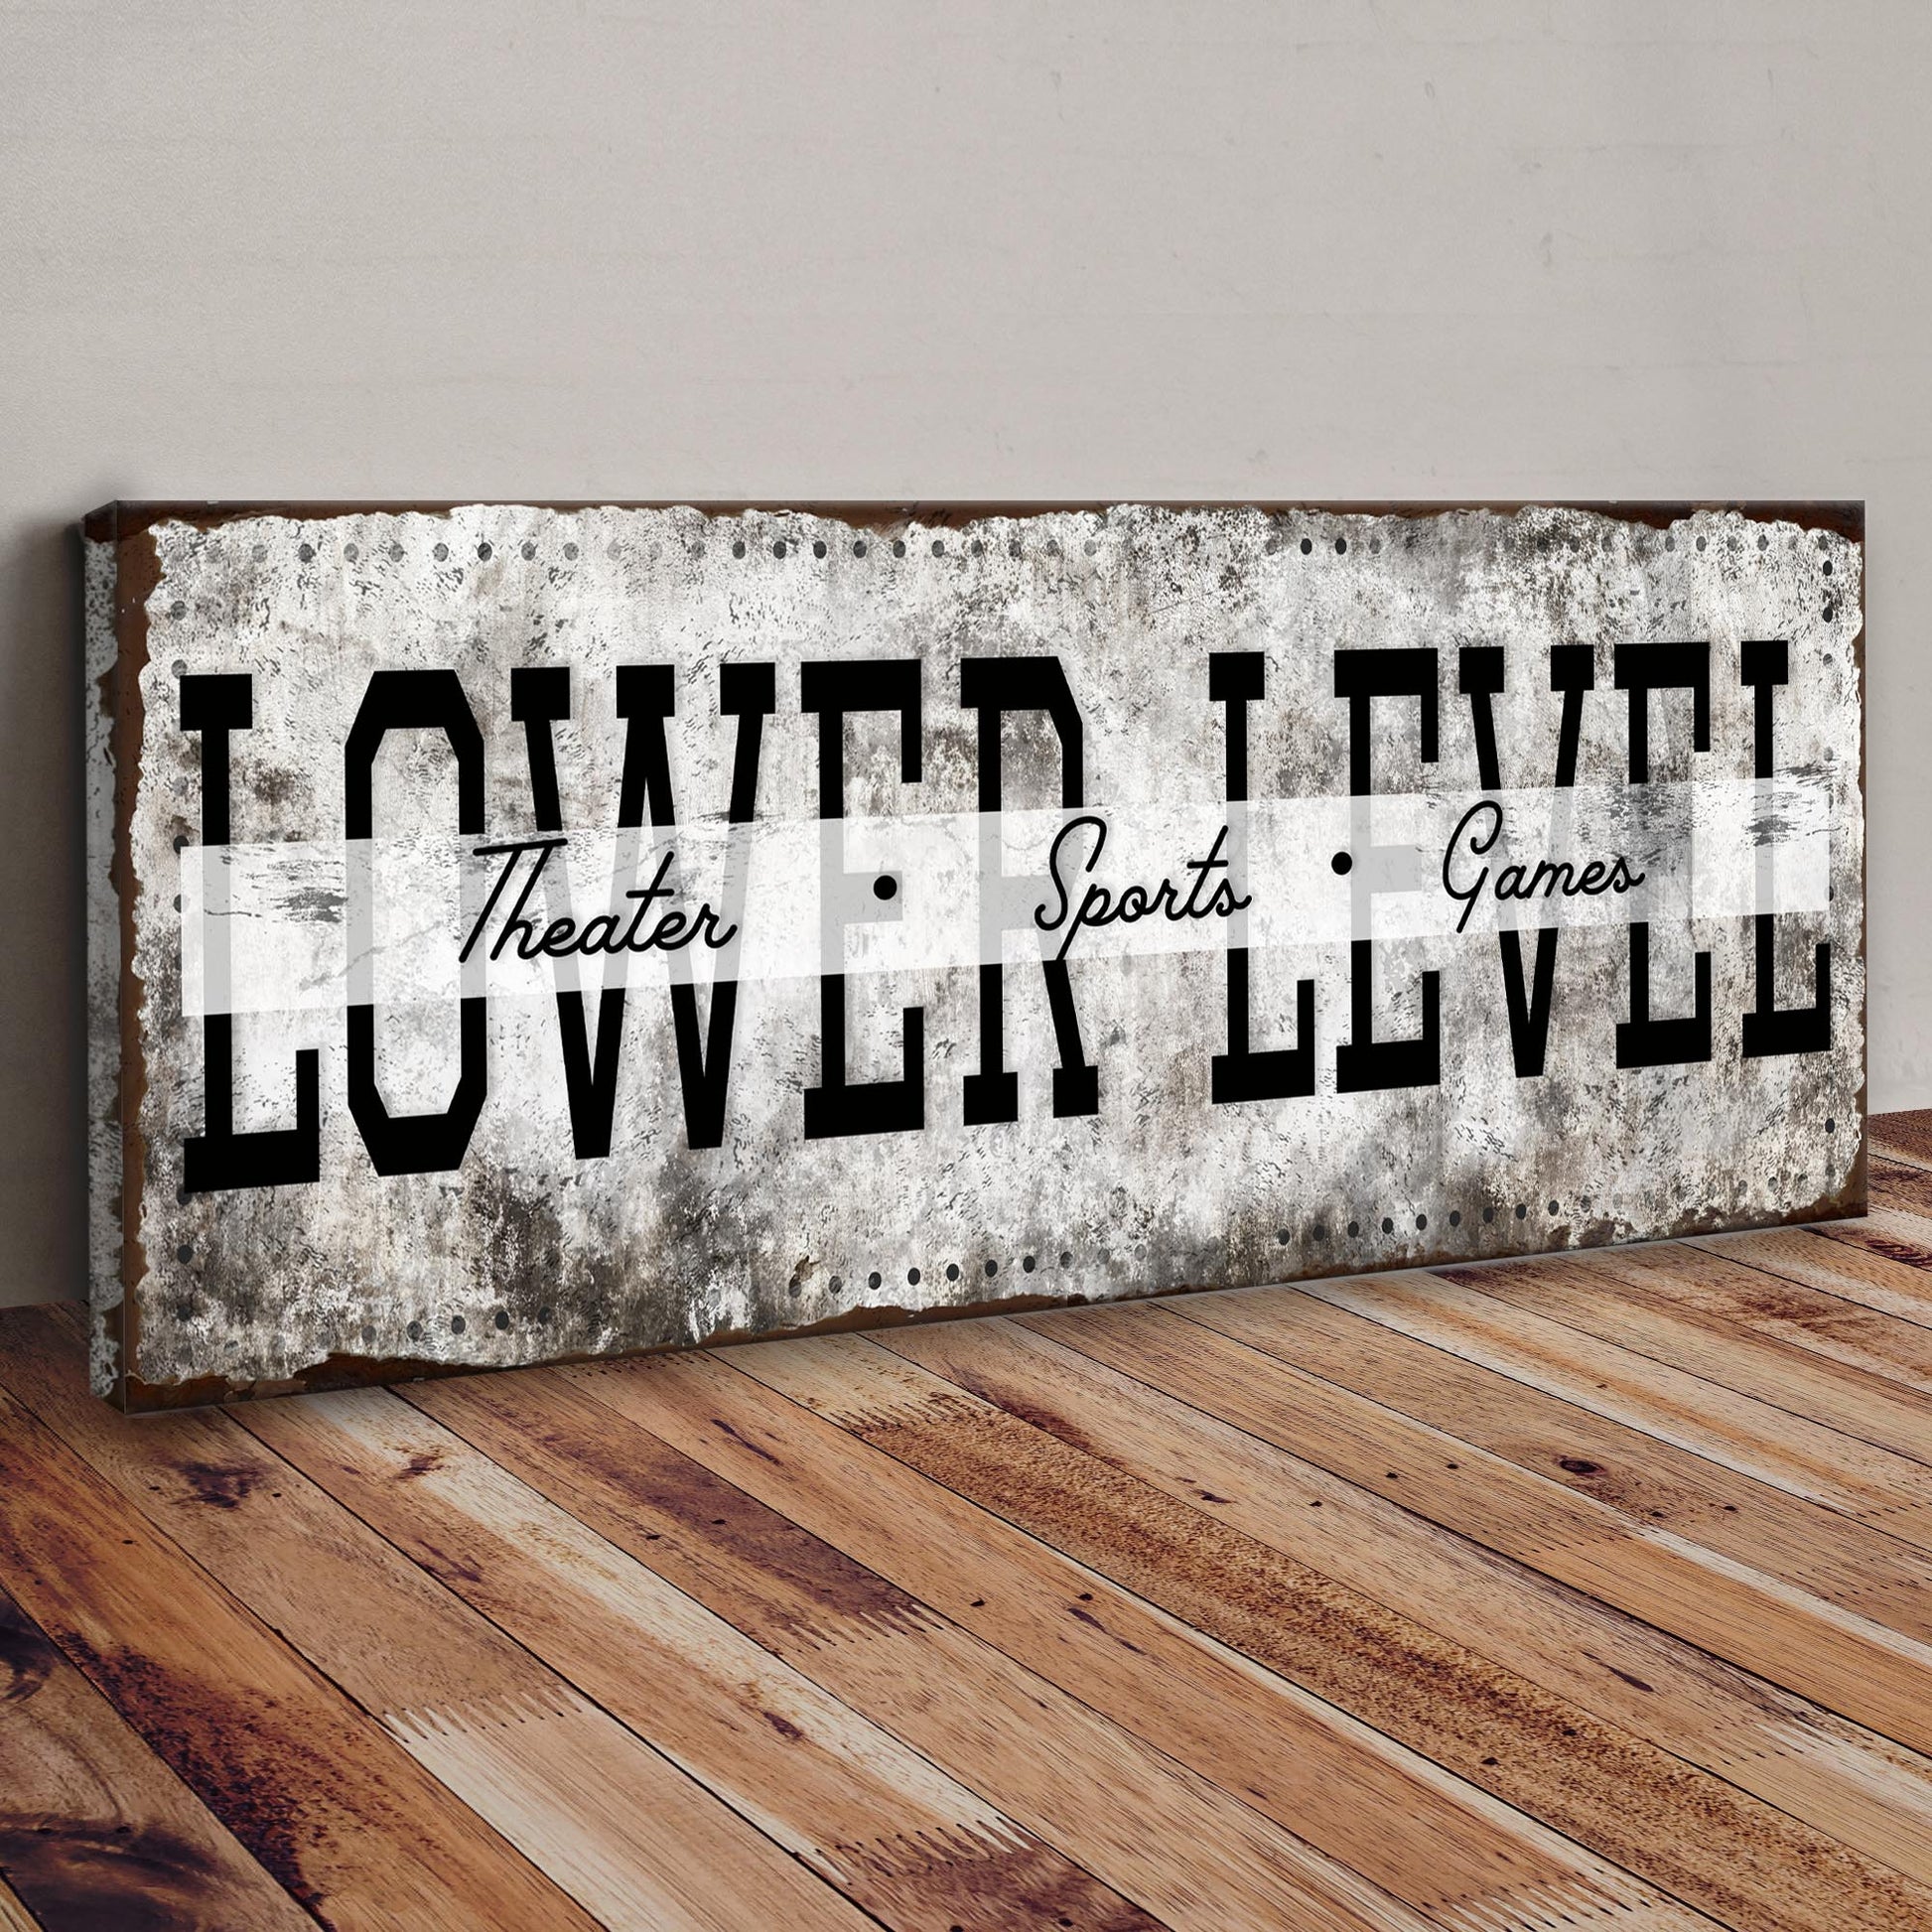 Lower Level Theater Sports Games Basement Bar Sign Style 1 - Image by Tailored Canvases